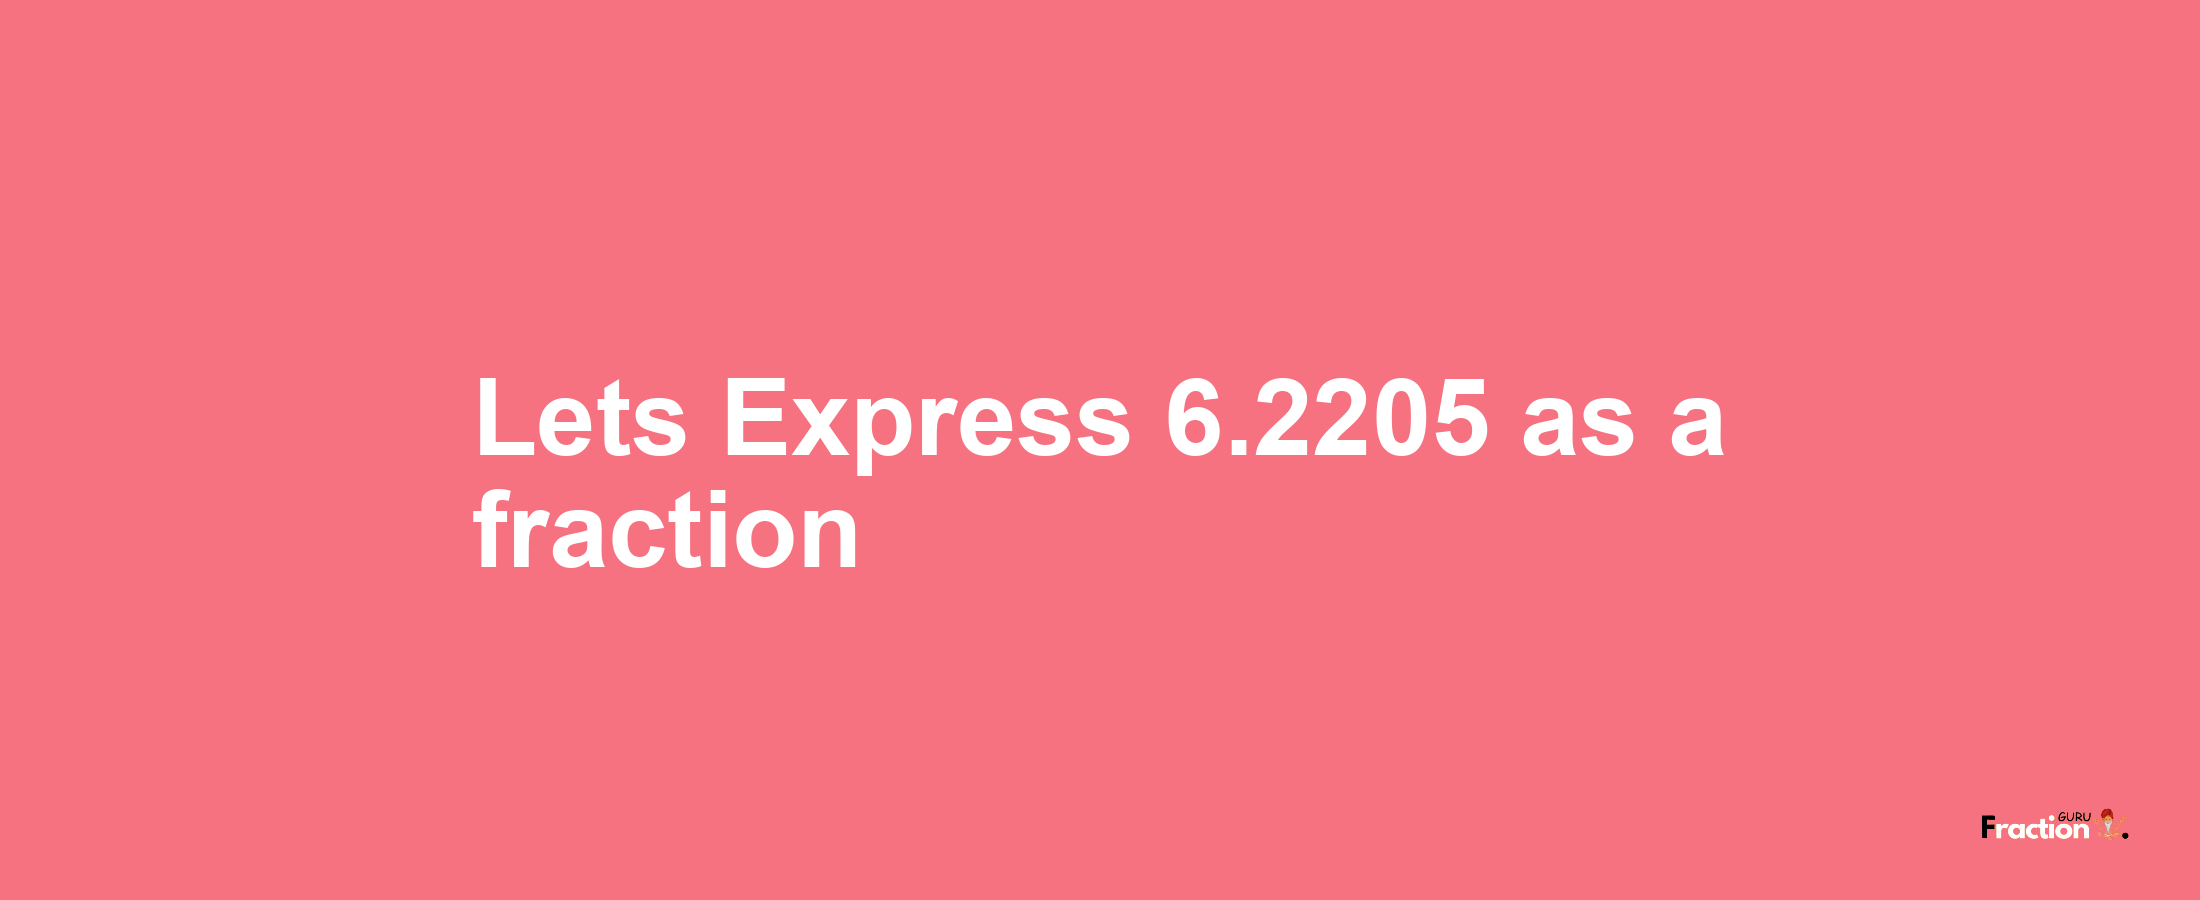 Lets Express 6.2205 as afraction